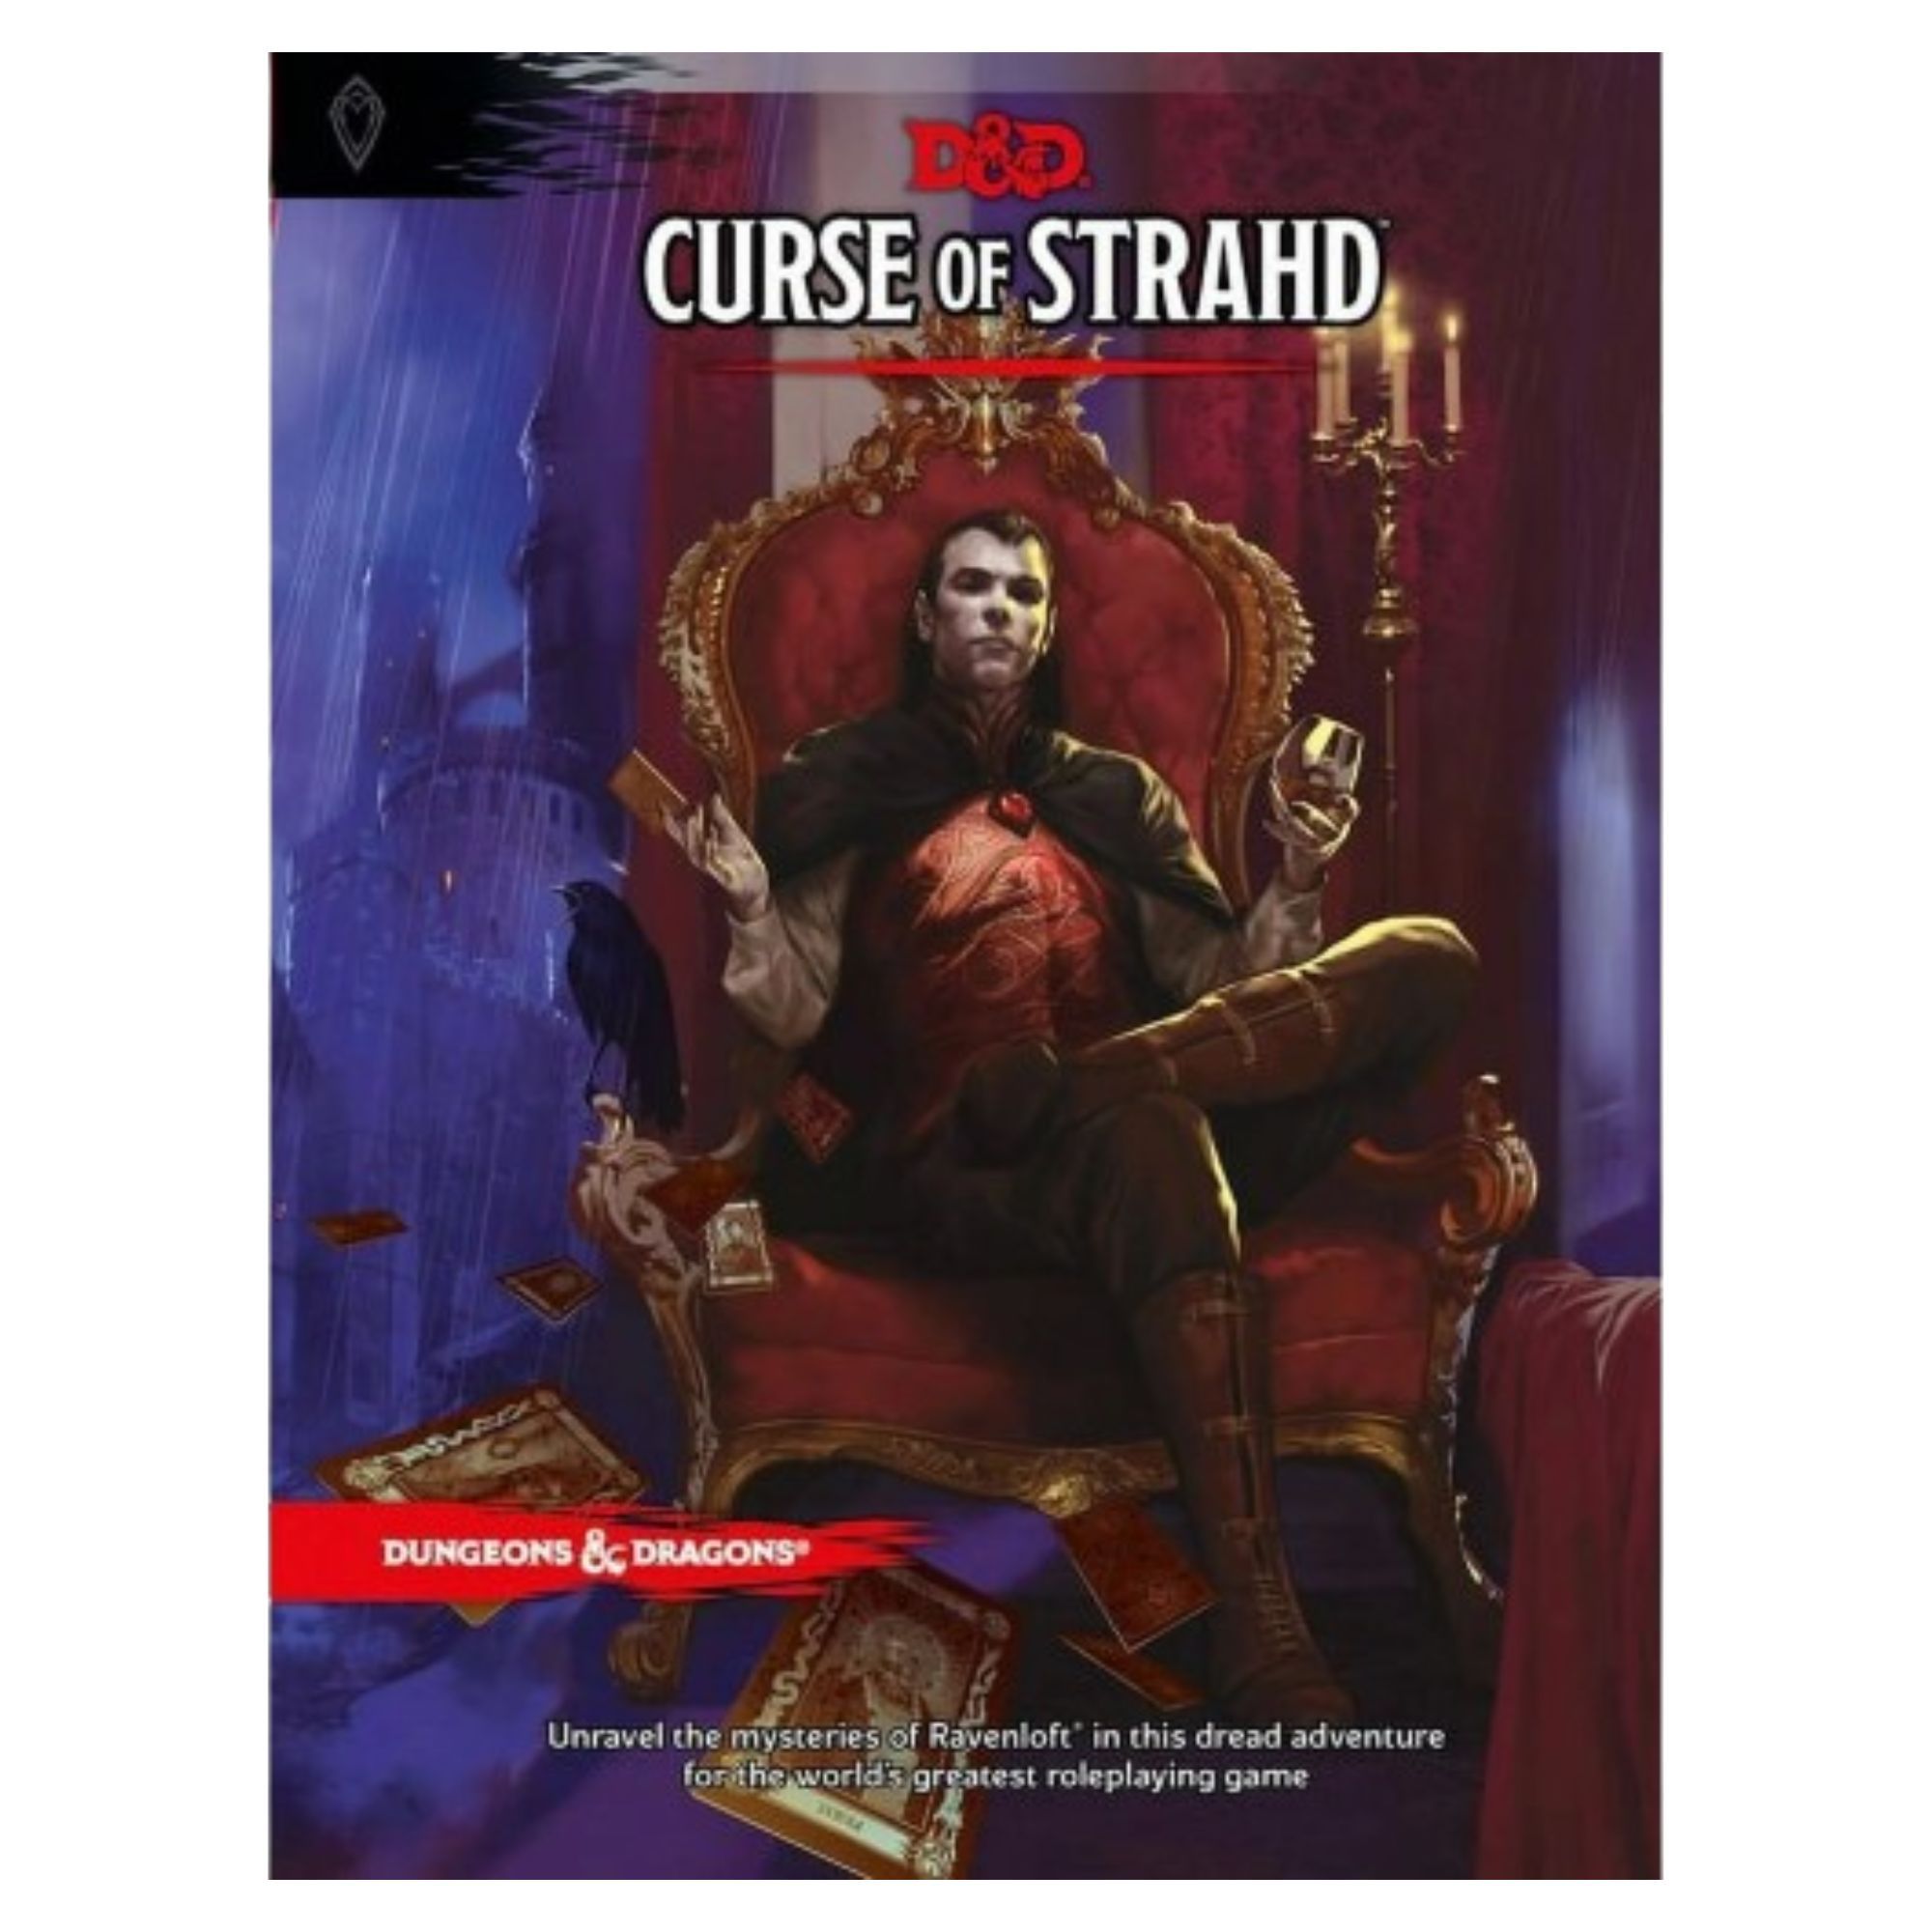 Product still of the Dungeons & Dragons Curse of Strahd Adventure Book on a white background